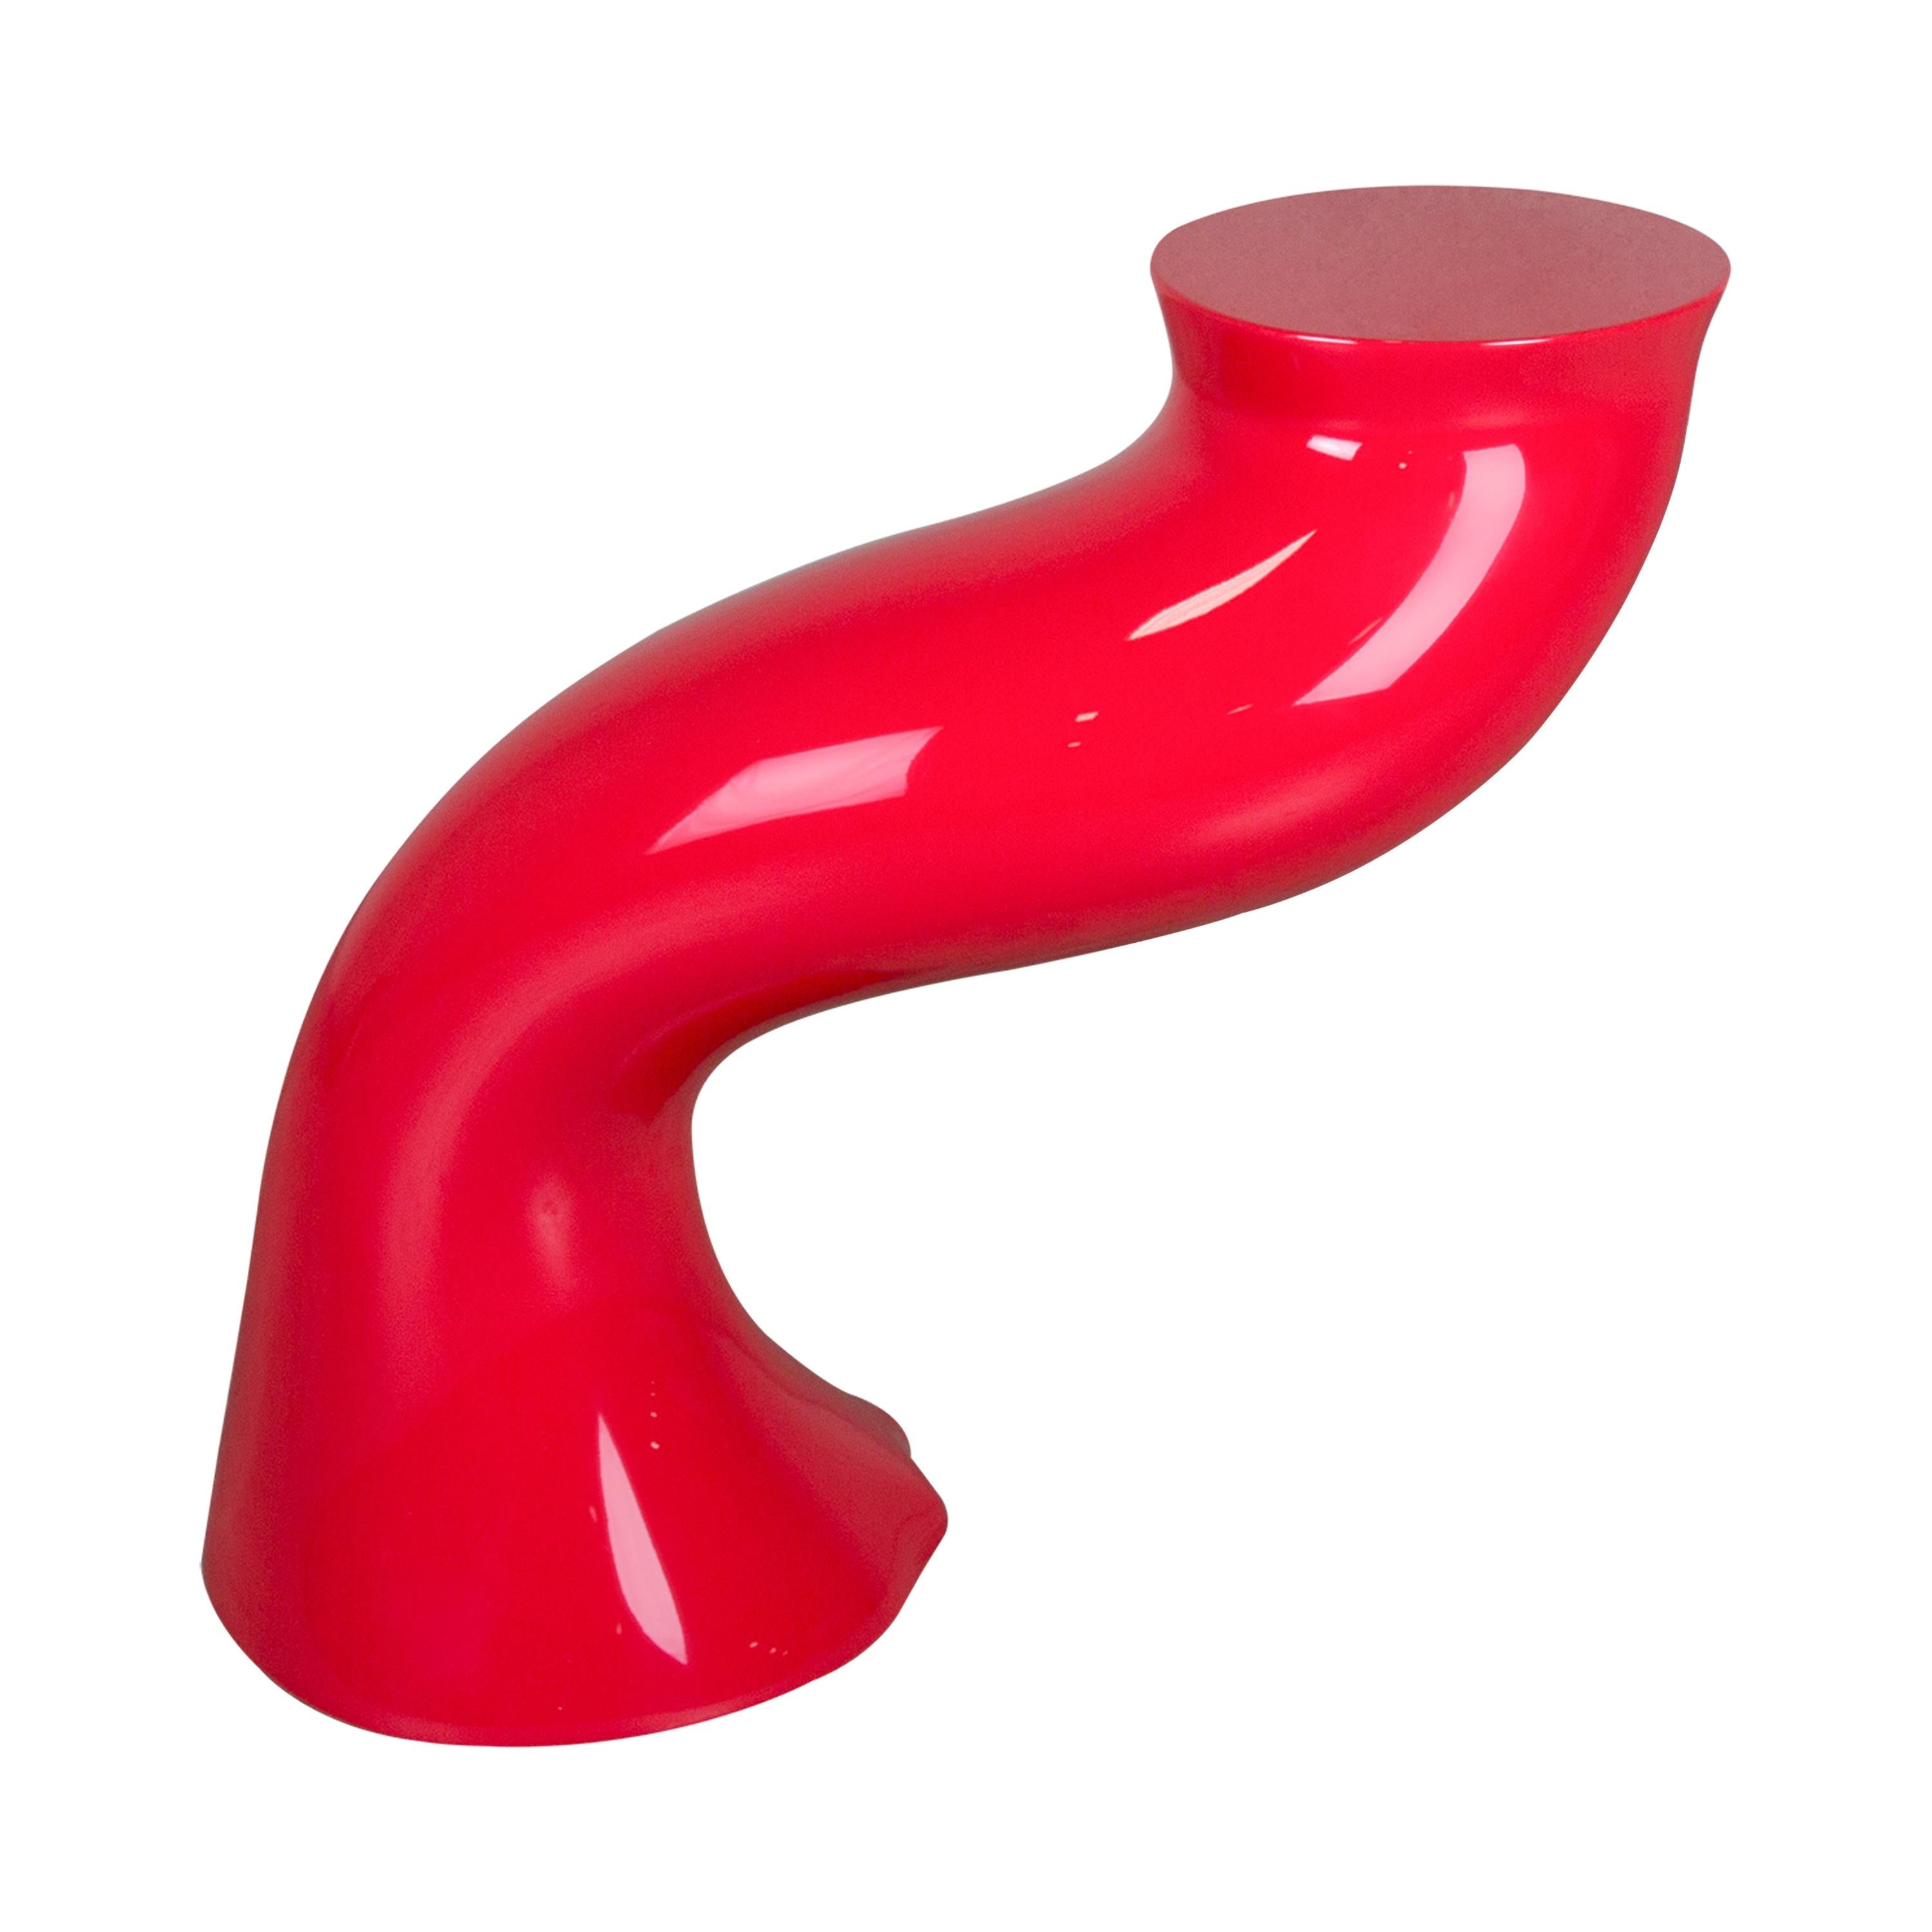 Wendell Castle, Curving Table No. 8, Red, Fiberglass, circa 1969